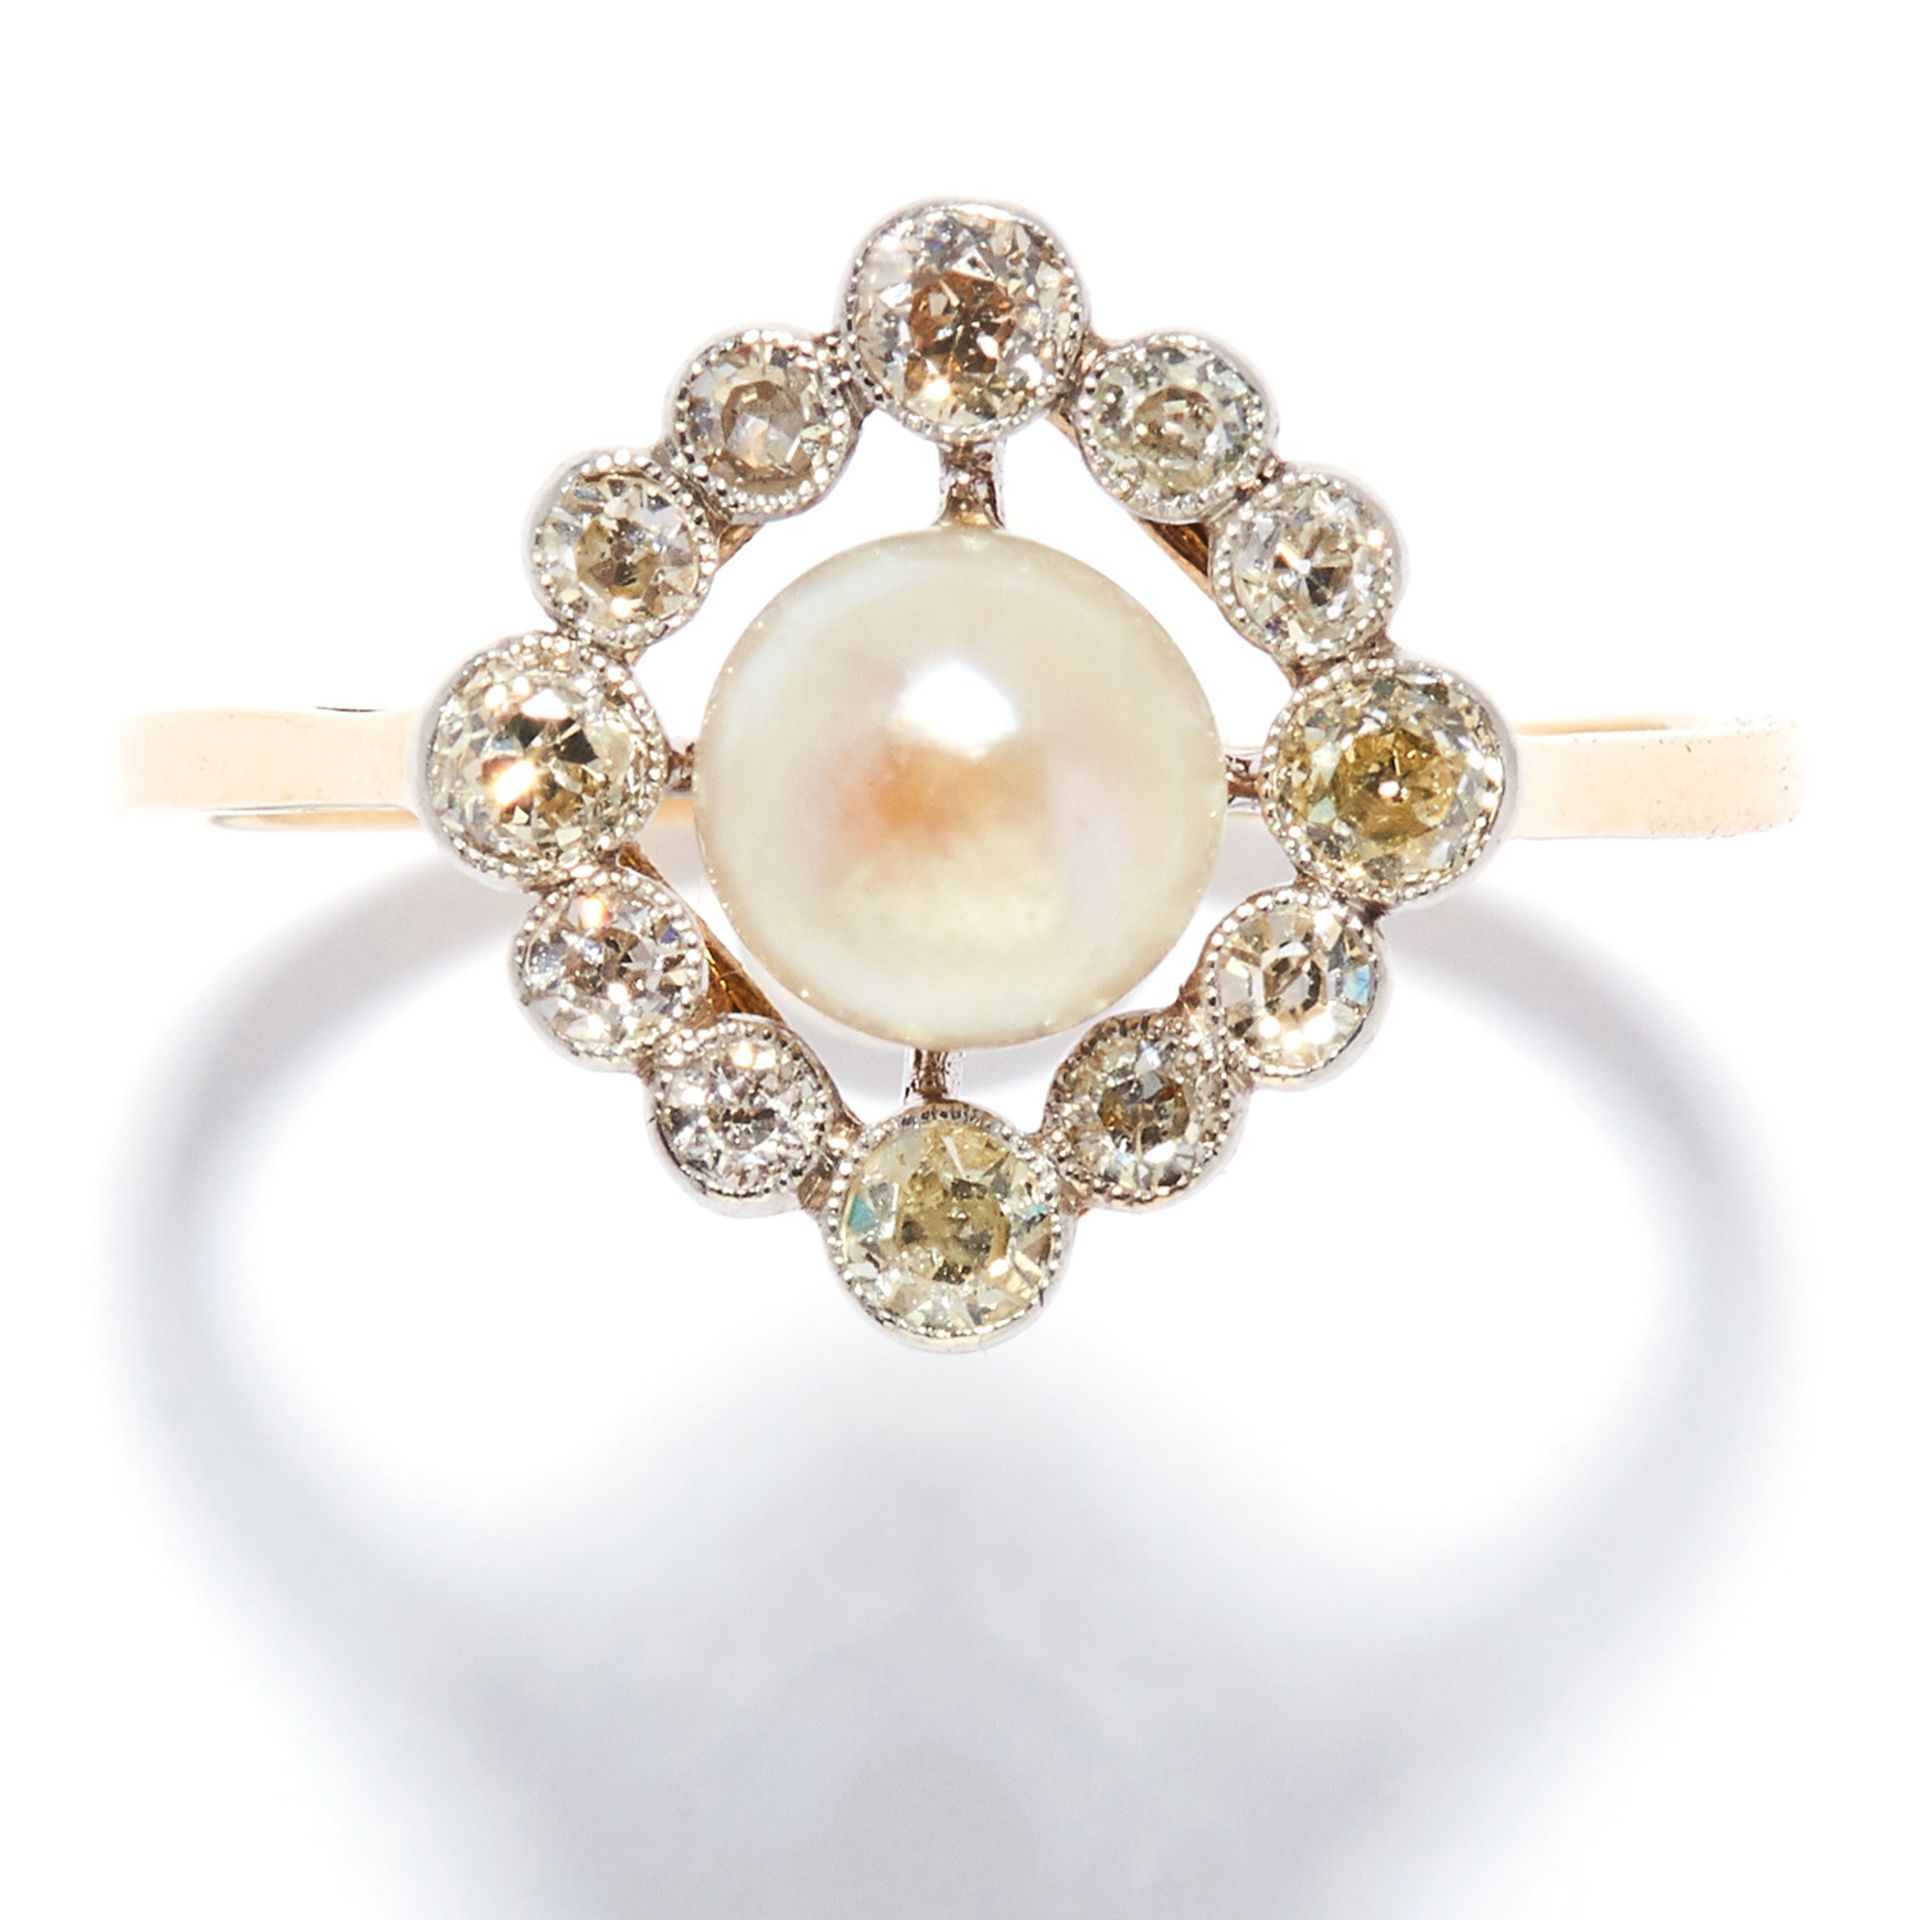 ANTIQUE PEARL AND DIAMOND DRESS RING in high carat yellow gold, set with a pearl of 6.2mm in a